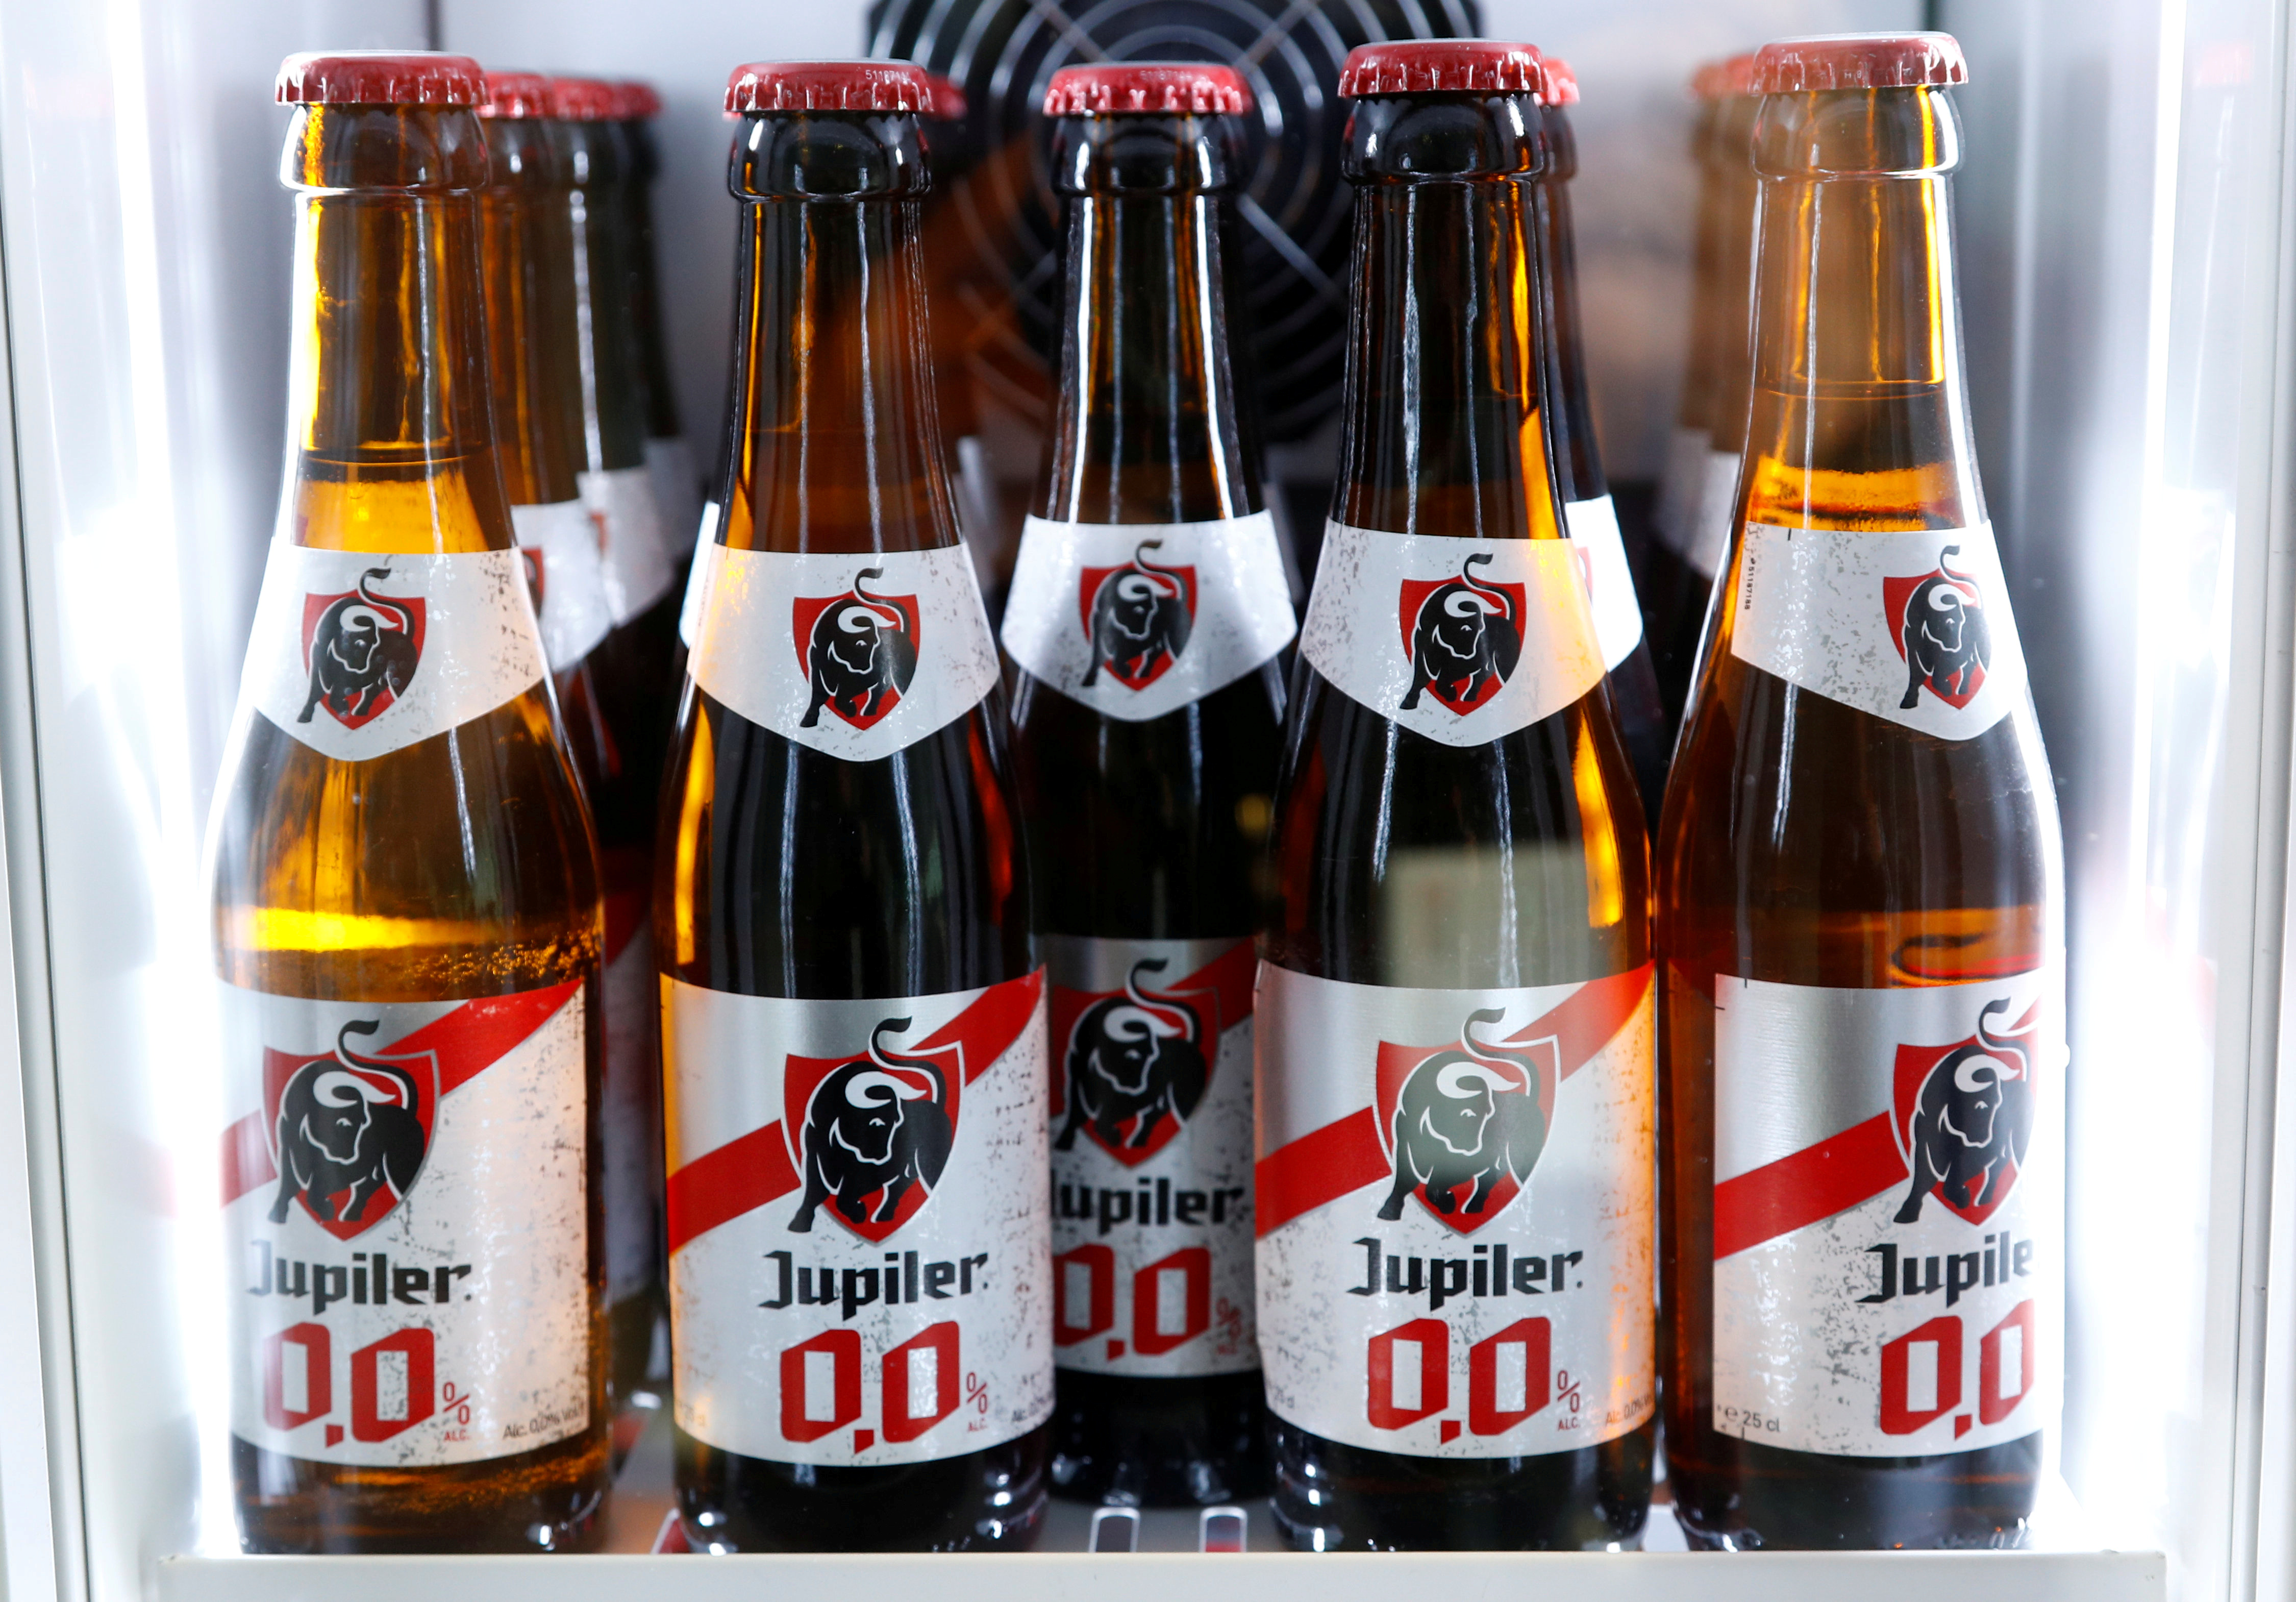 Non-alcoholic Jupiler beer bottles are seen at the headquarters of AB InBev in Leuven